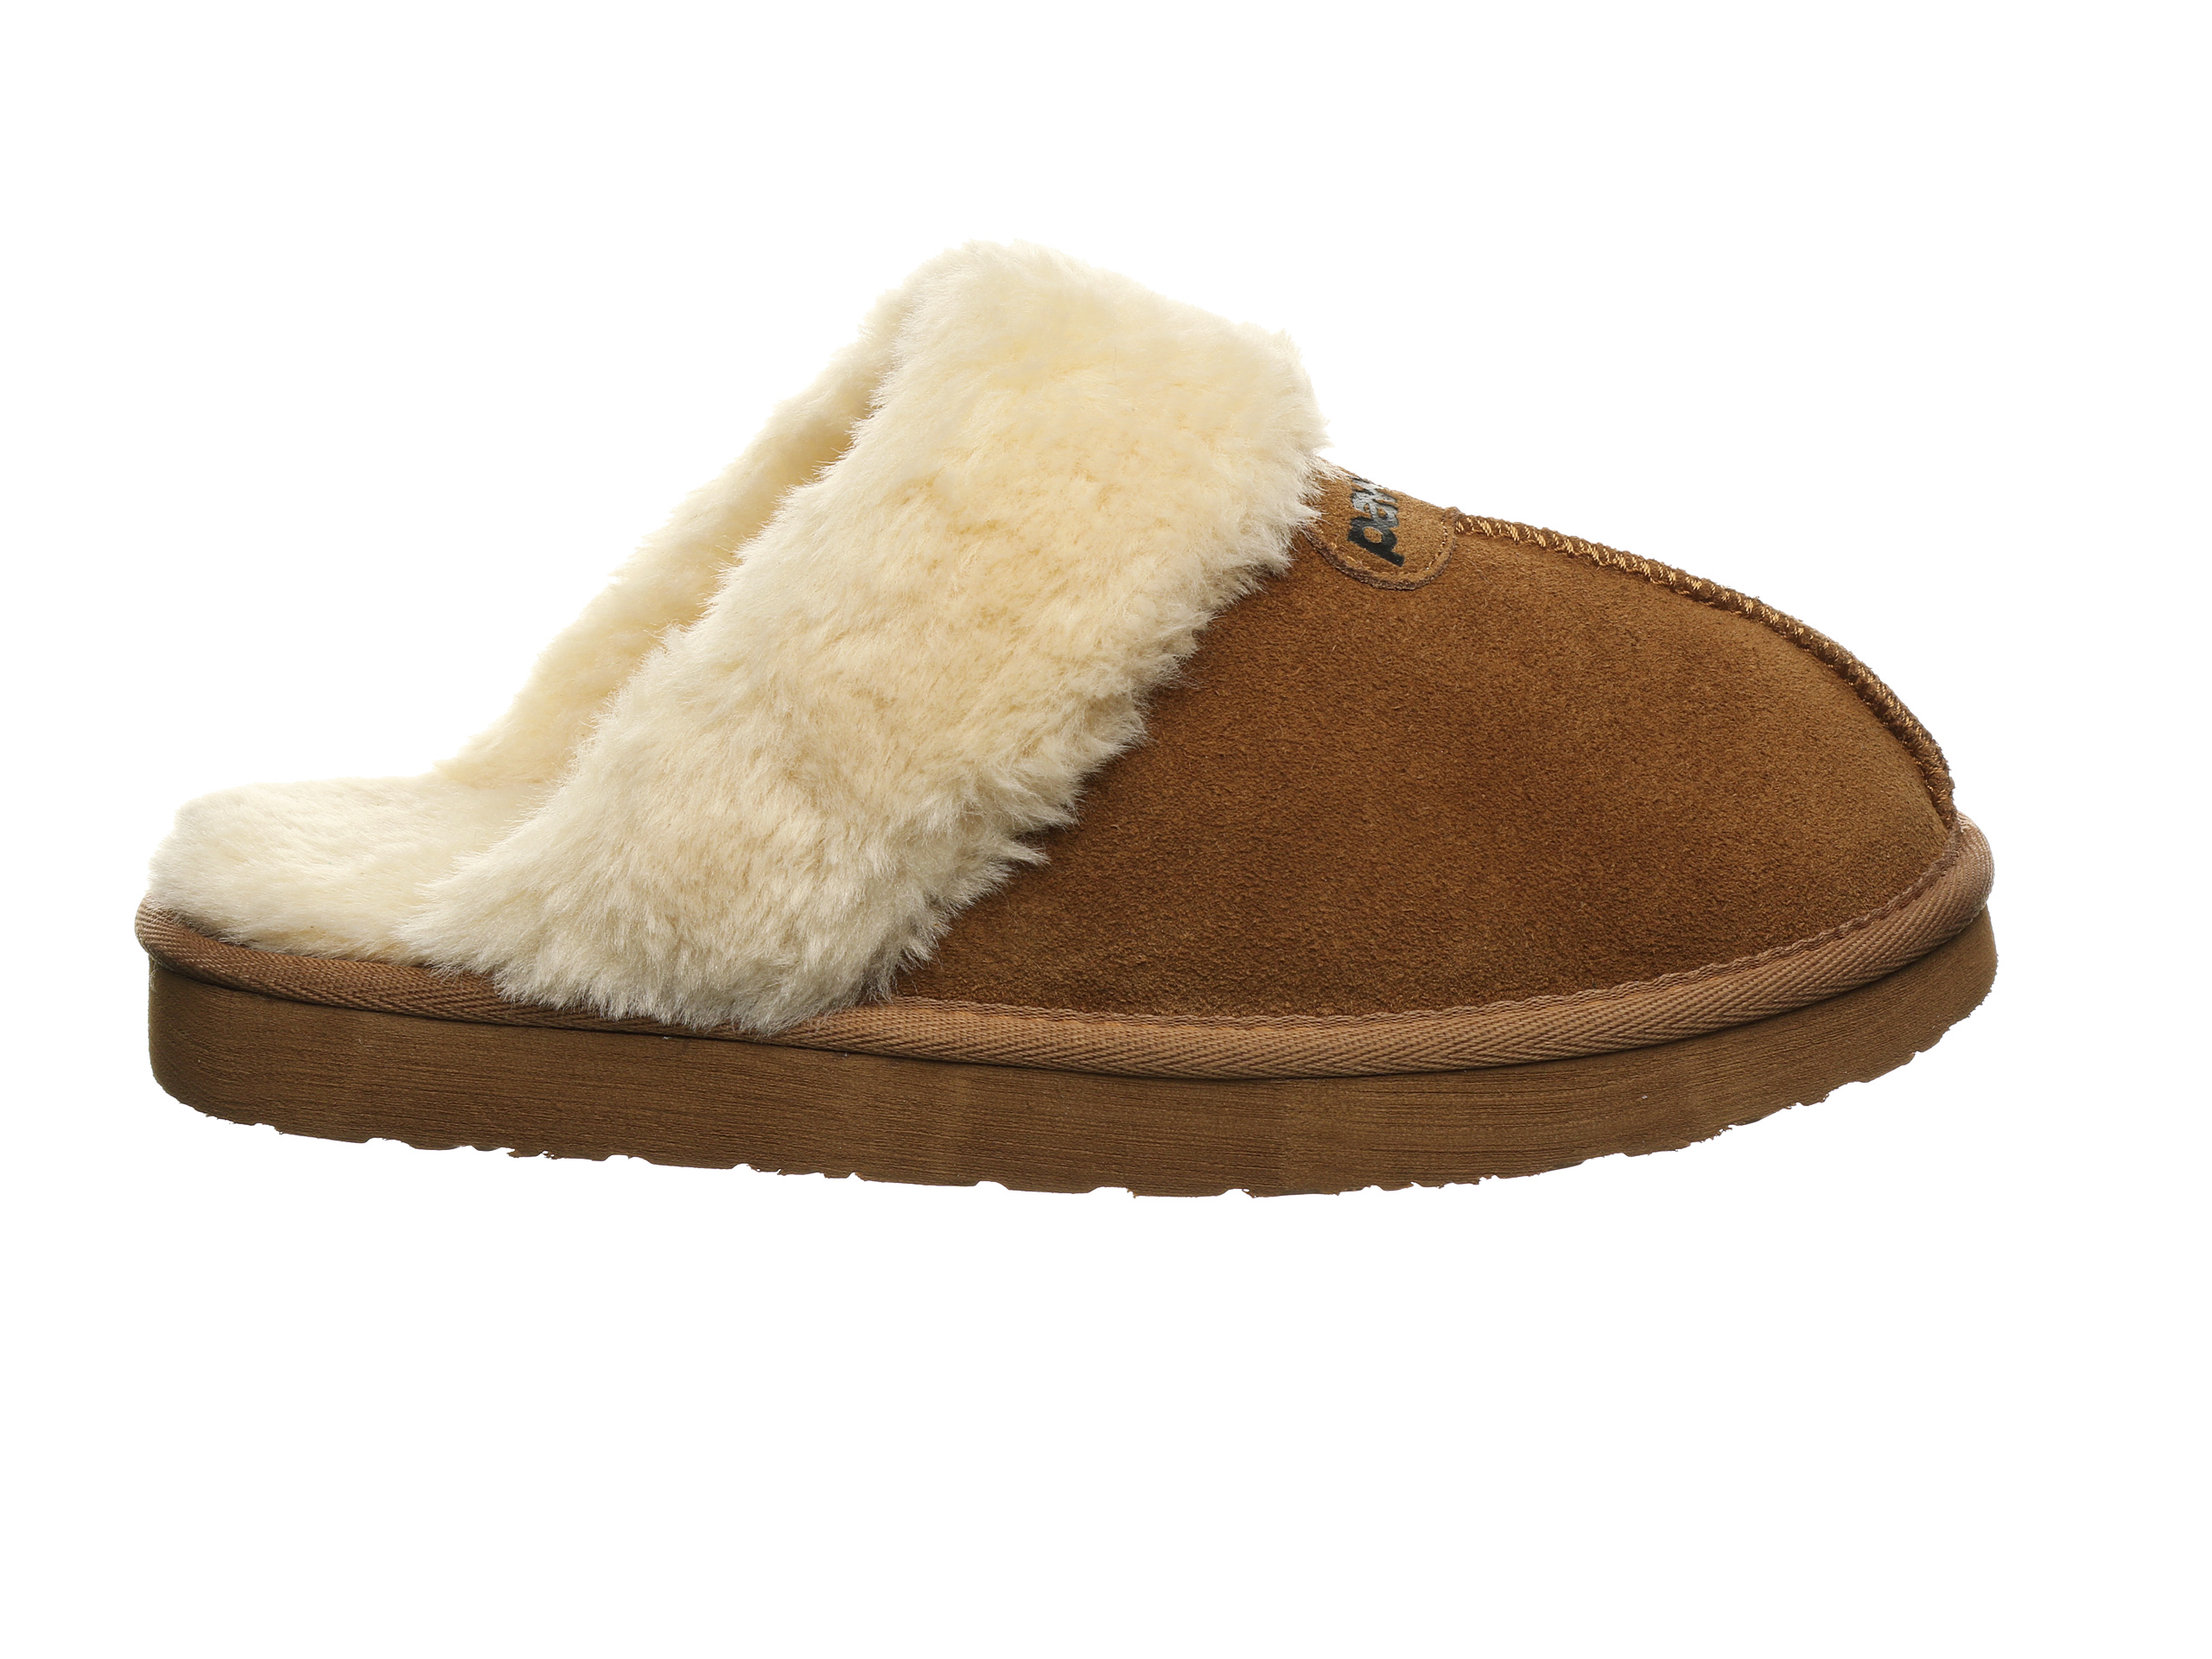 Pawz by Bearpaw Meredith Faux Fur Lined Suede Scuff Slipper (Women's) - image 4 of 15